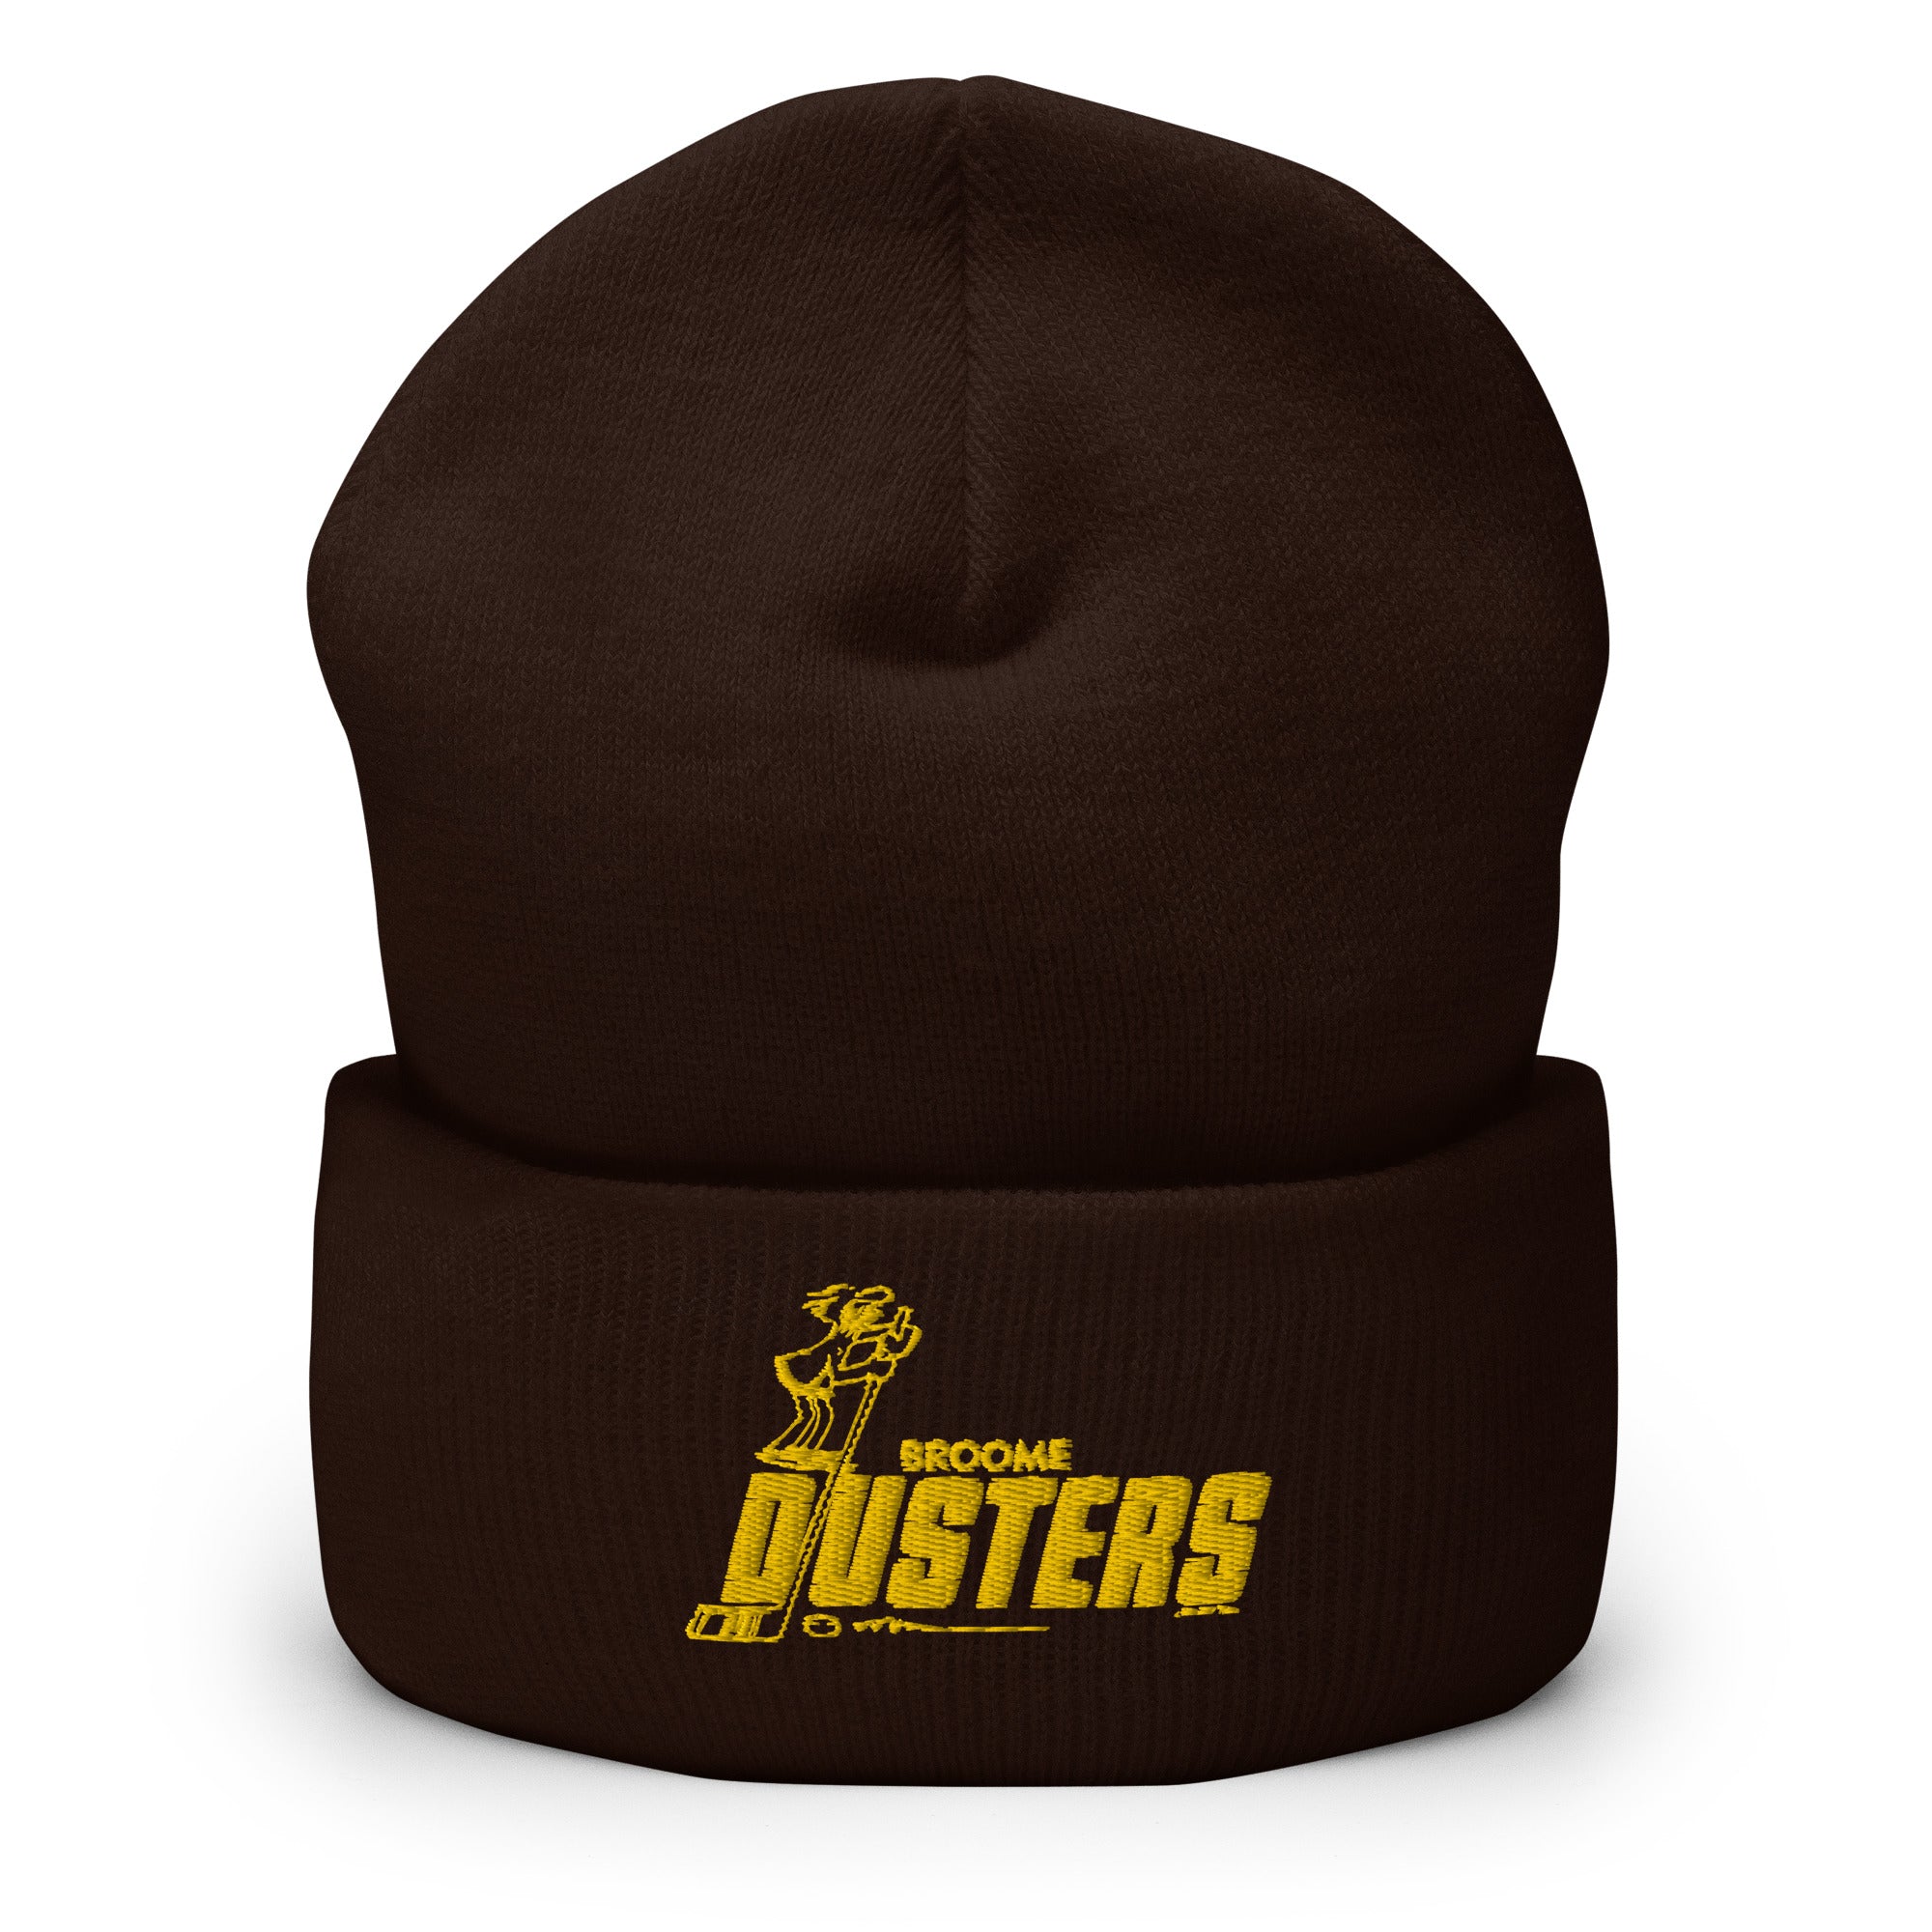 Broome Dusters™ Beanie